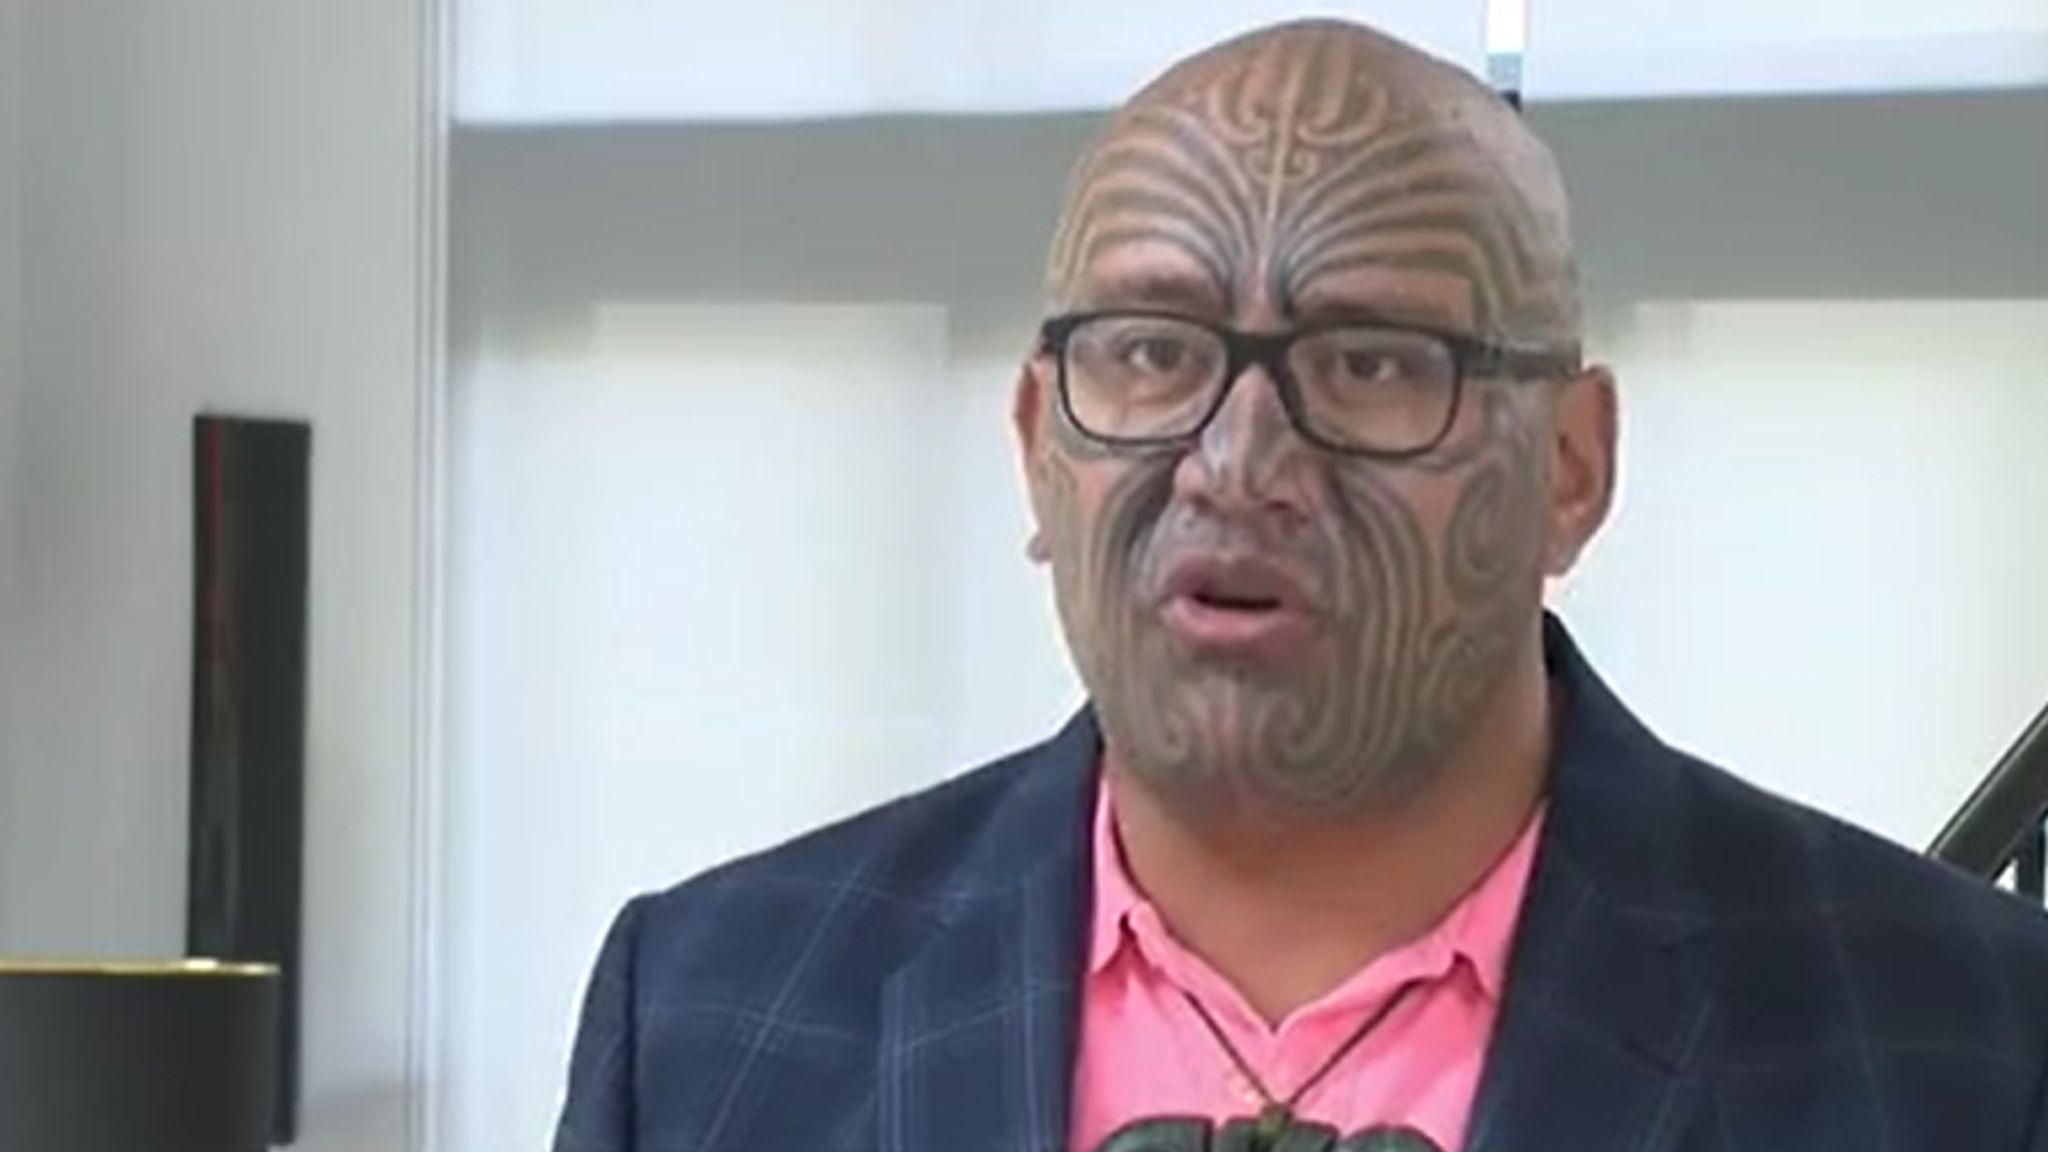 Maori Mp Rawiri Waititi Ejected From New Zealand Parliament For Refusing To Wear Tie World News Sky News